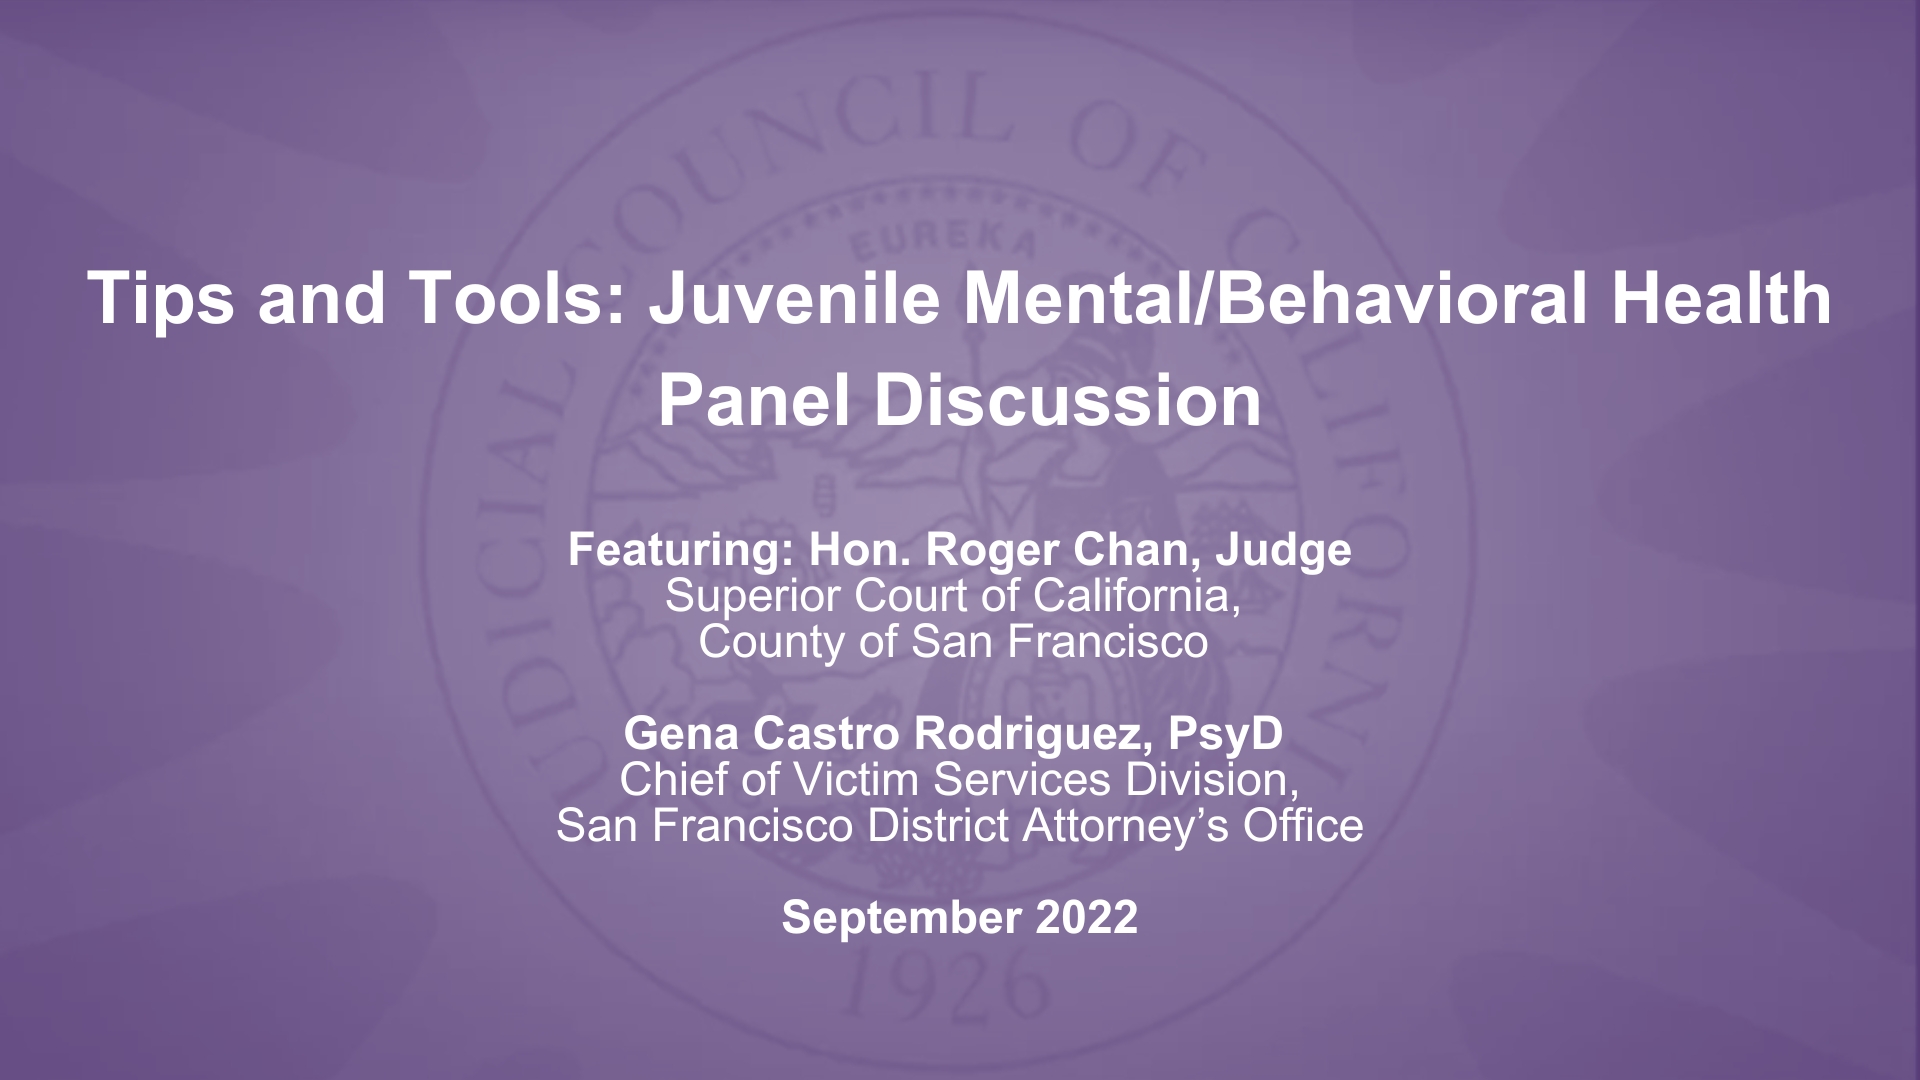 Tips and Tools on Juvenile Mental-Behavioral Health Panel Discussion